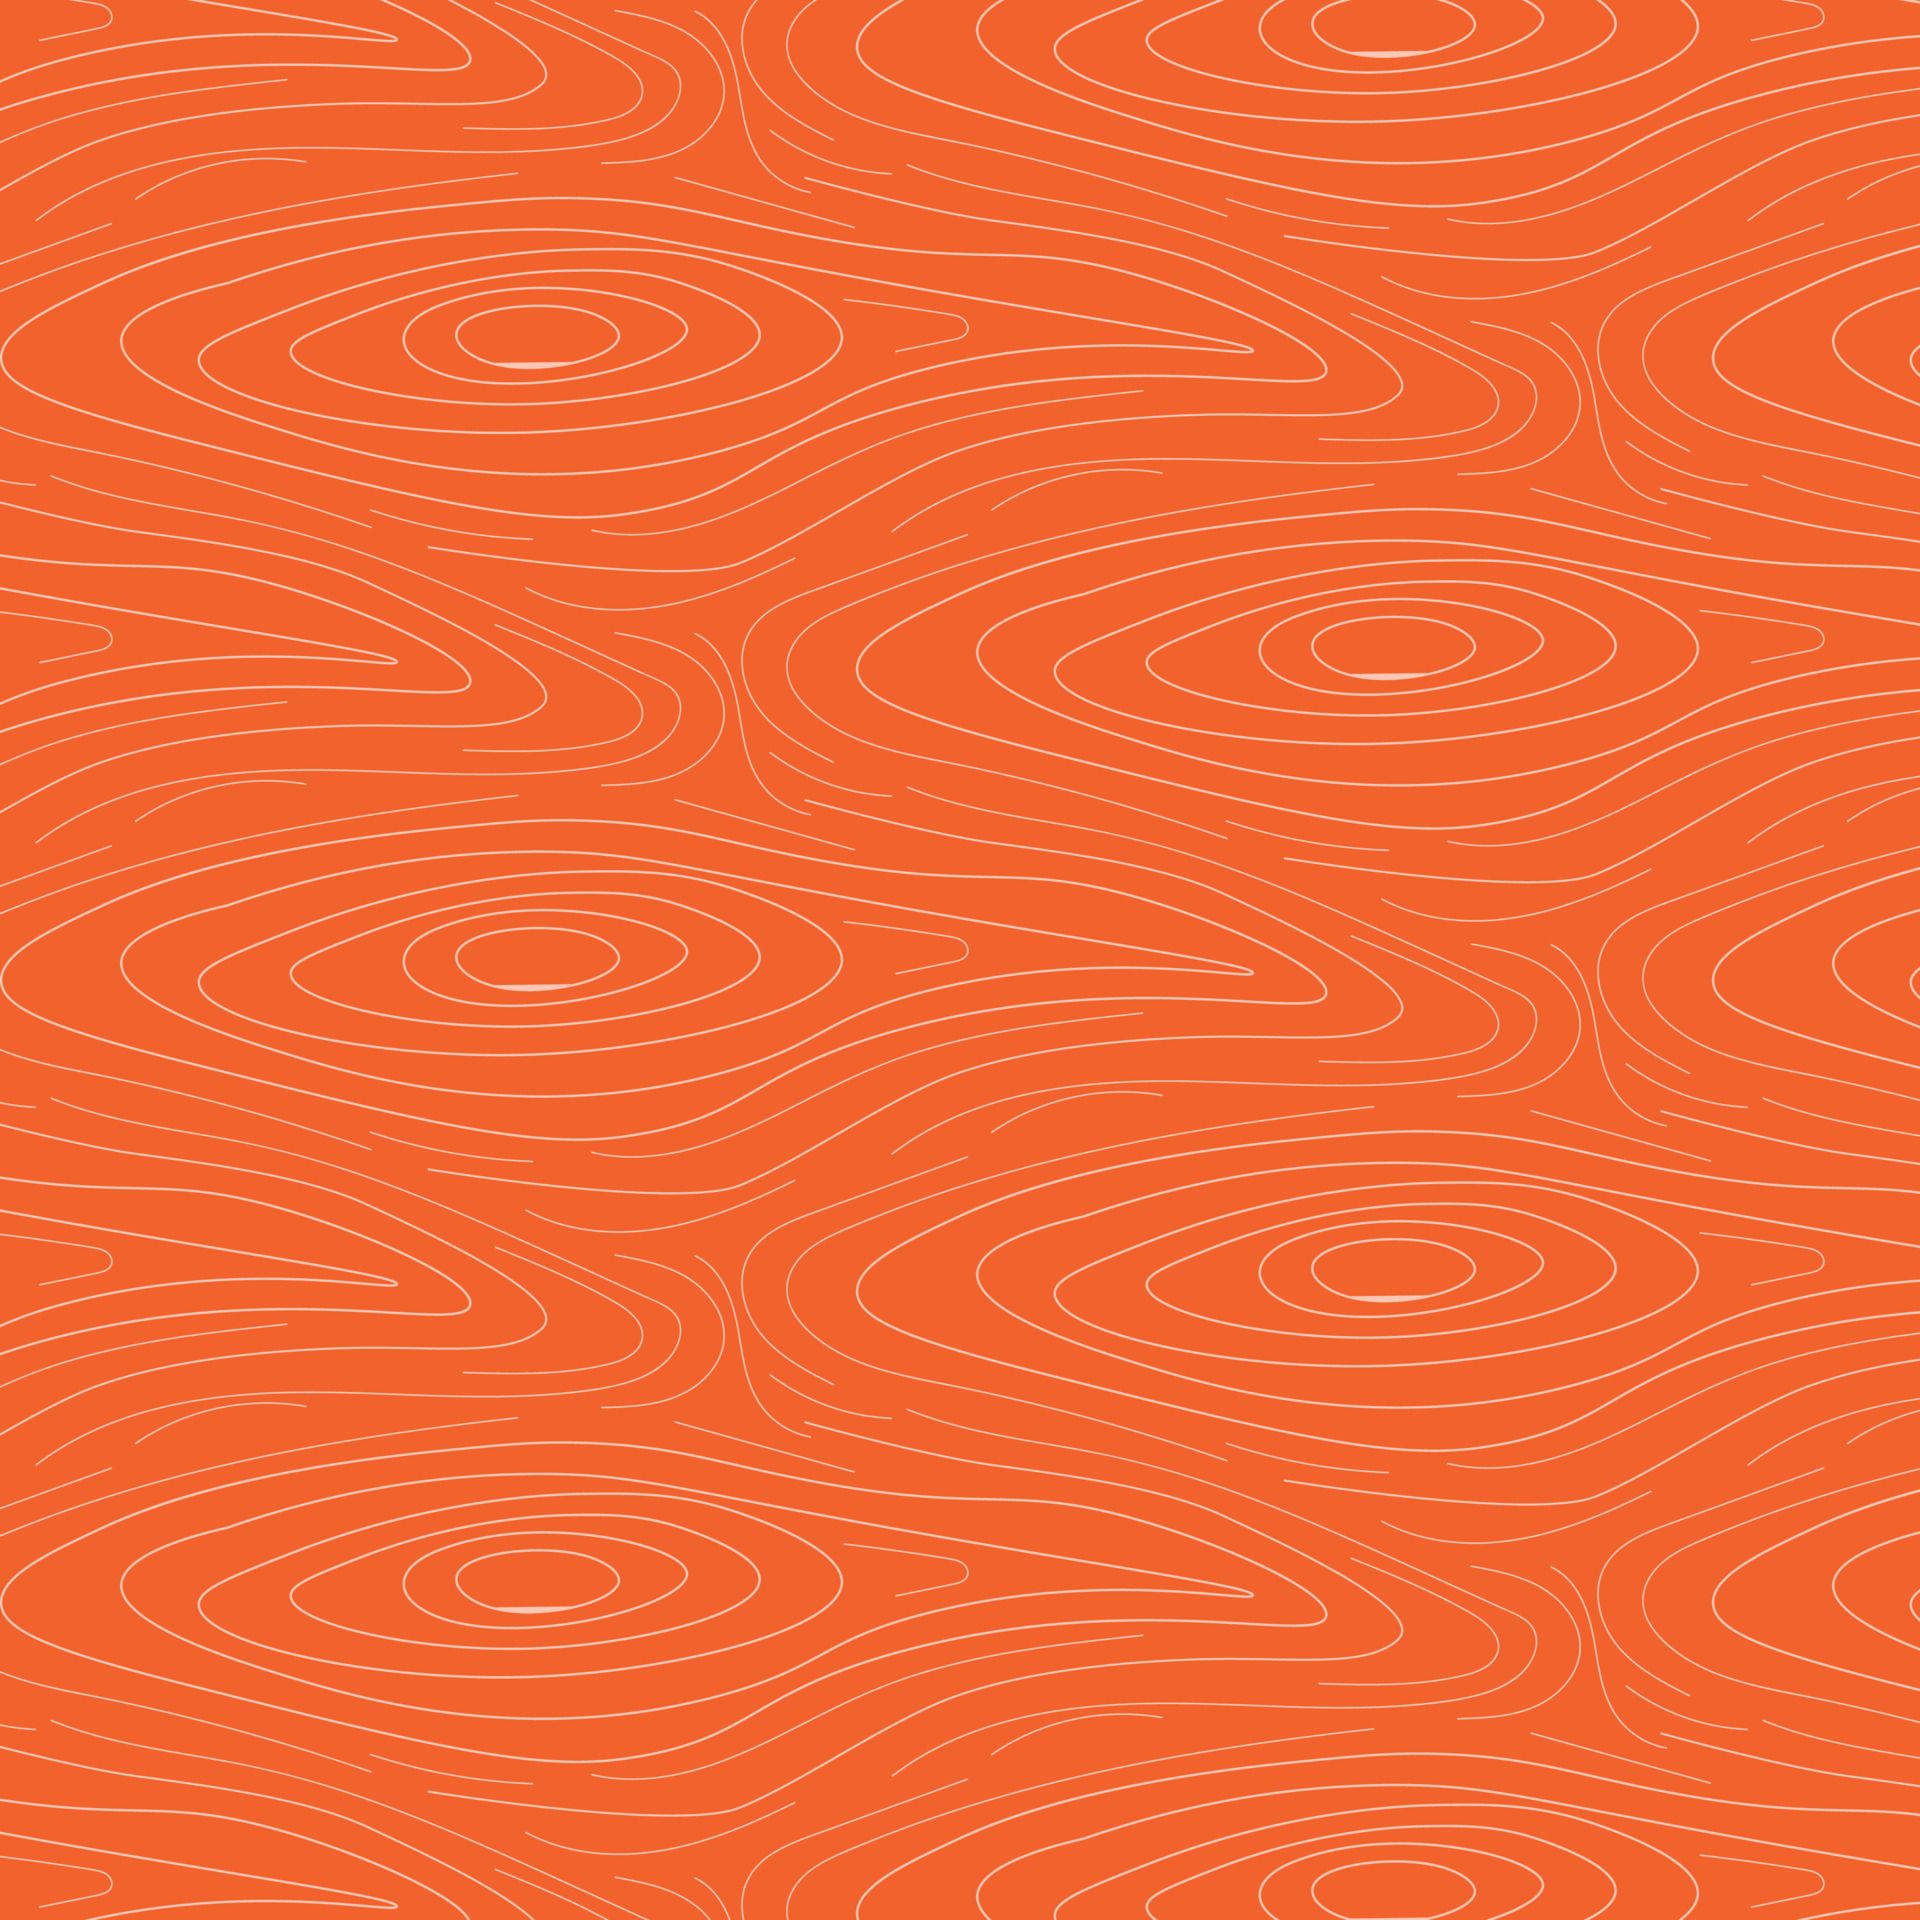 Salmon fillet texture, fish pattern. Vector background with salmon stripes